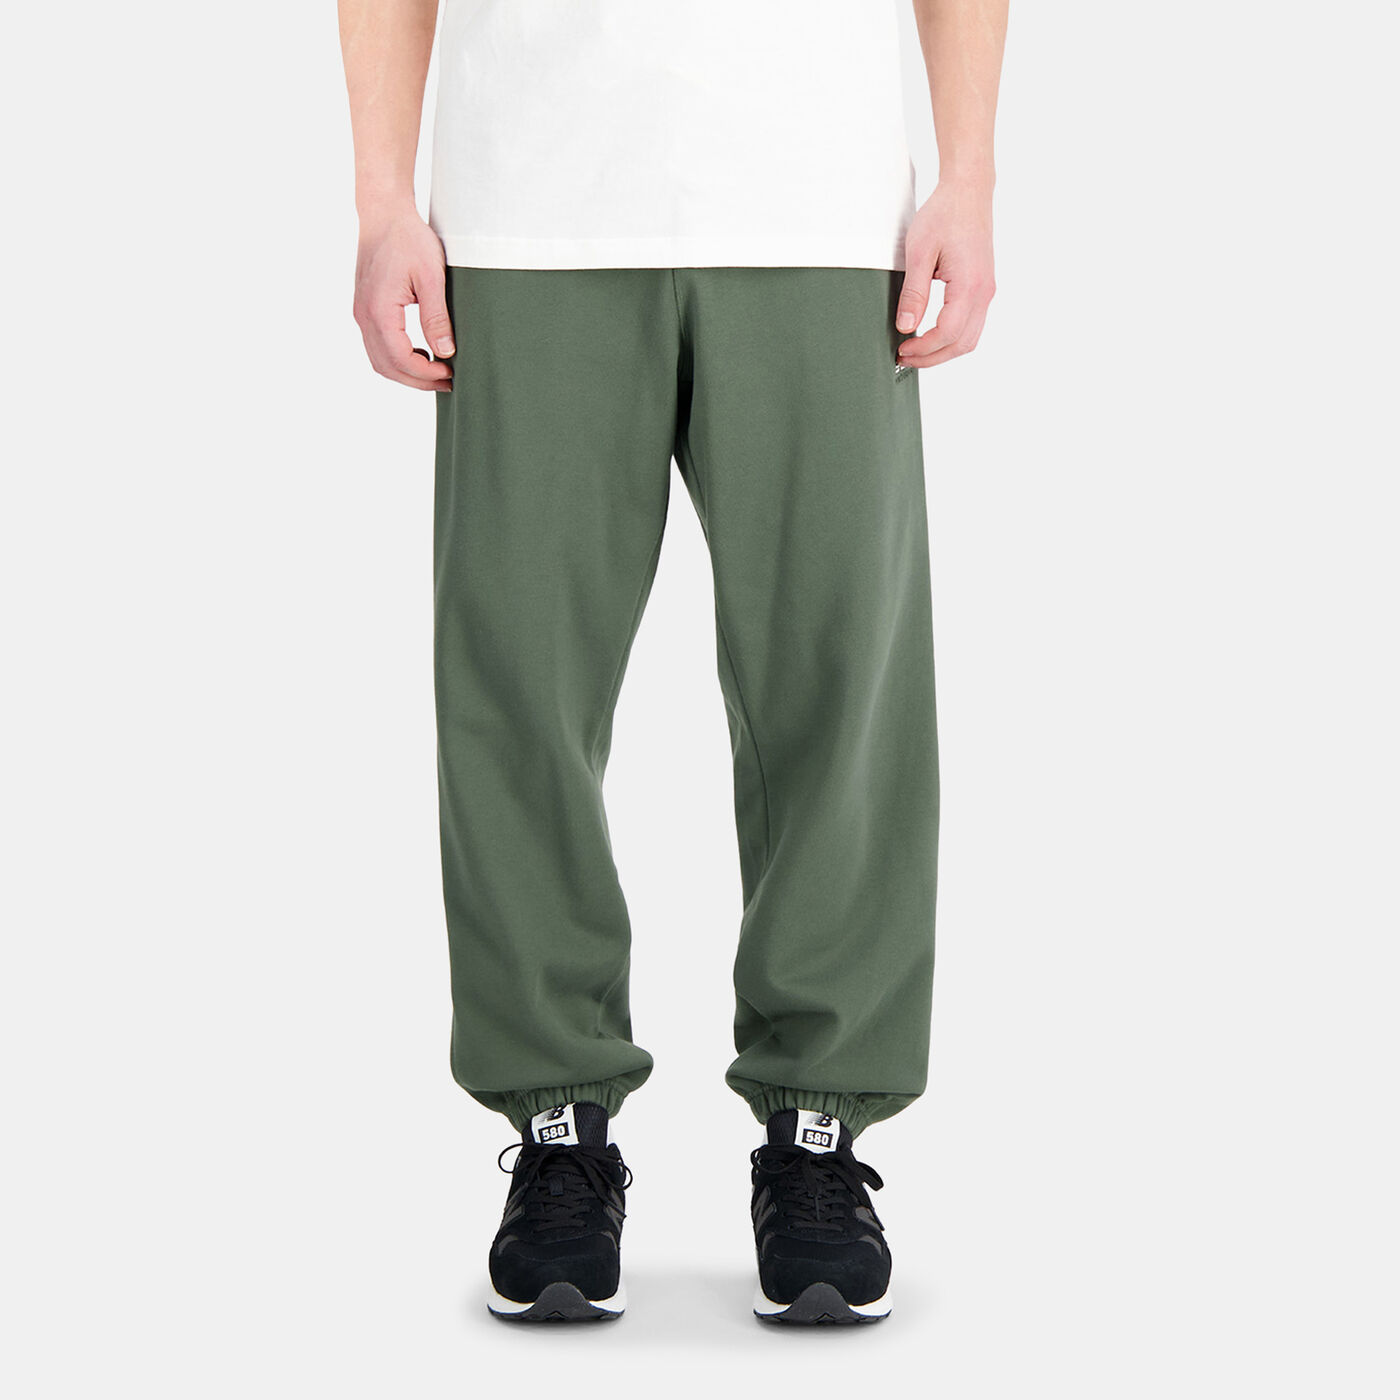 Men's Athletics Remastered French Terry Sweatpants